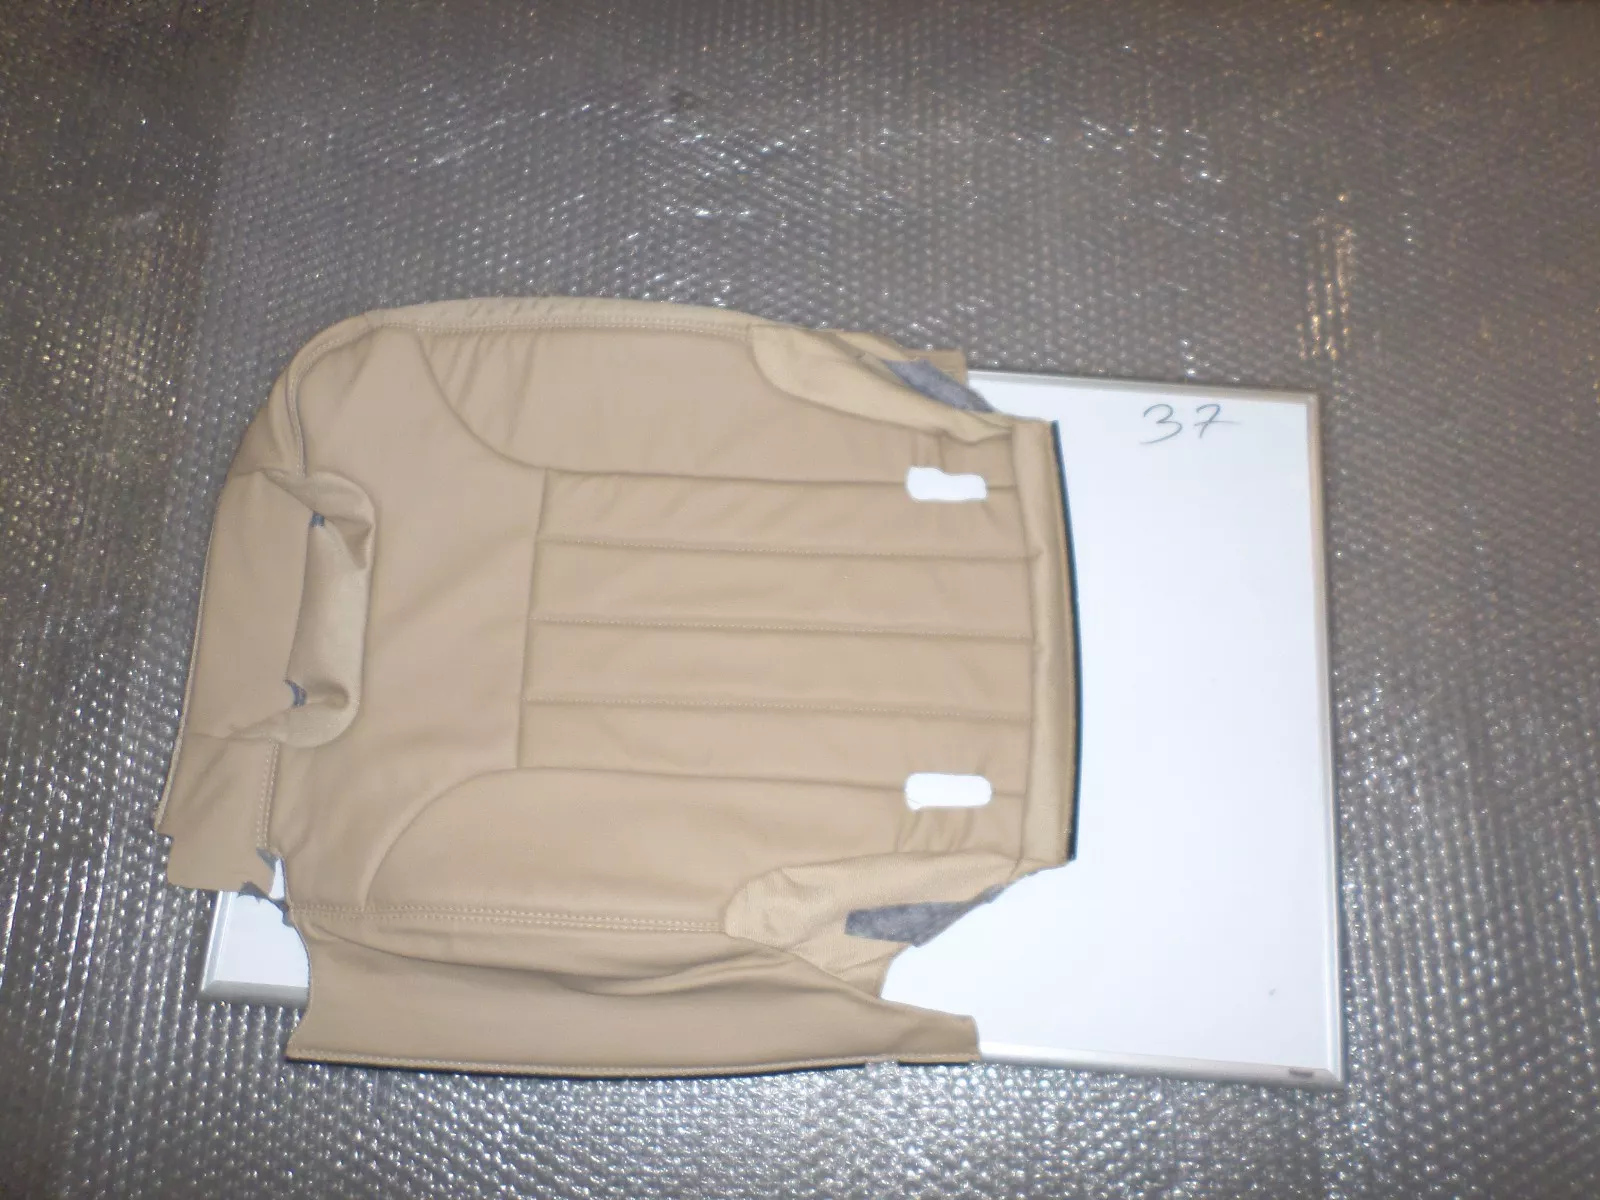 New OEM Mercedes 3rd Row LH Seat Cover 2006-2013 R-Class 251-930-08-87-8K55 - £77.84 GBP